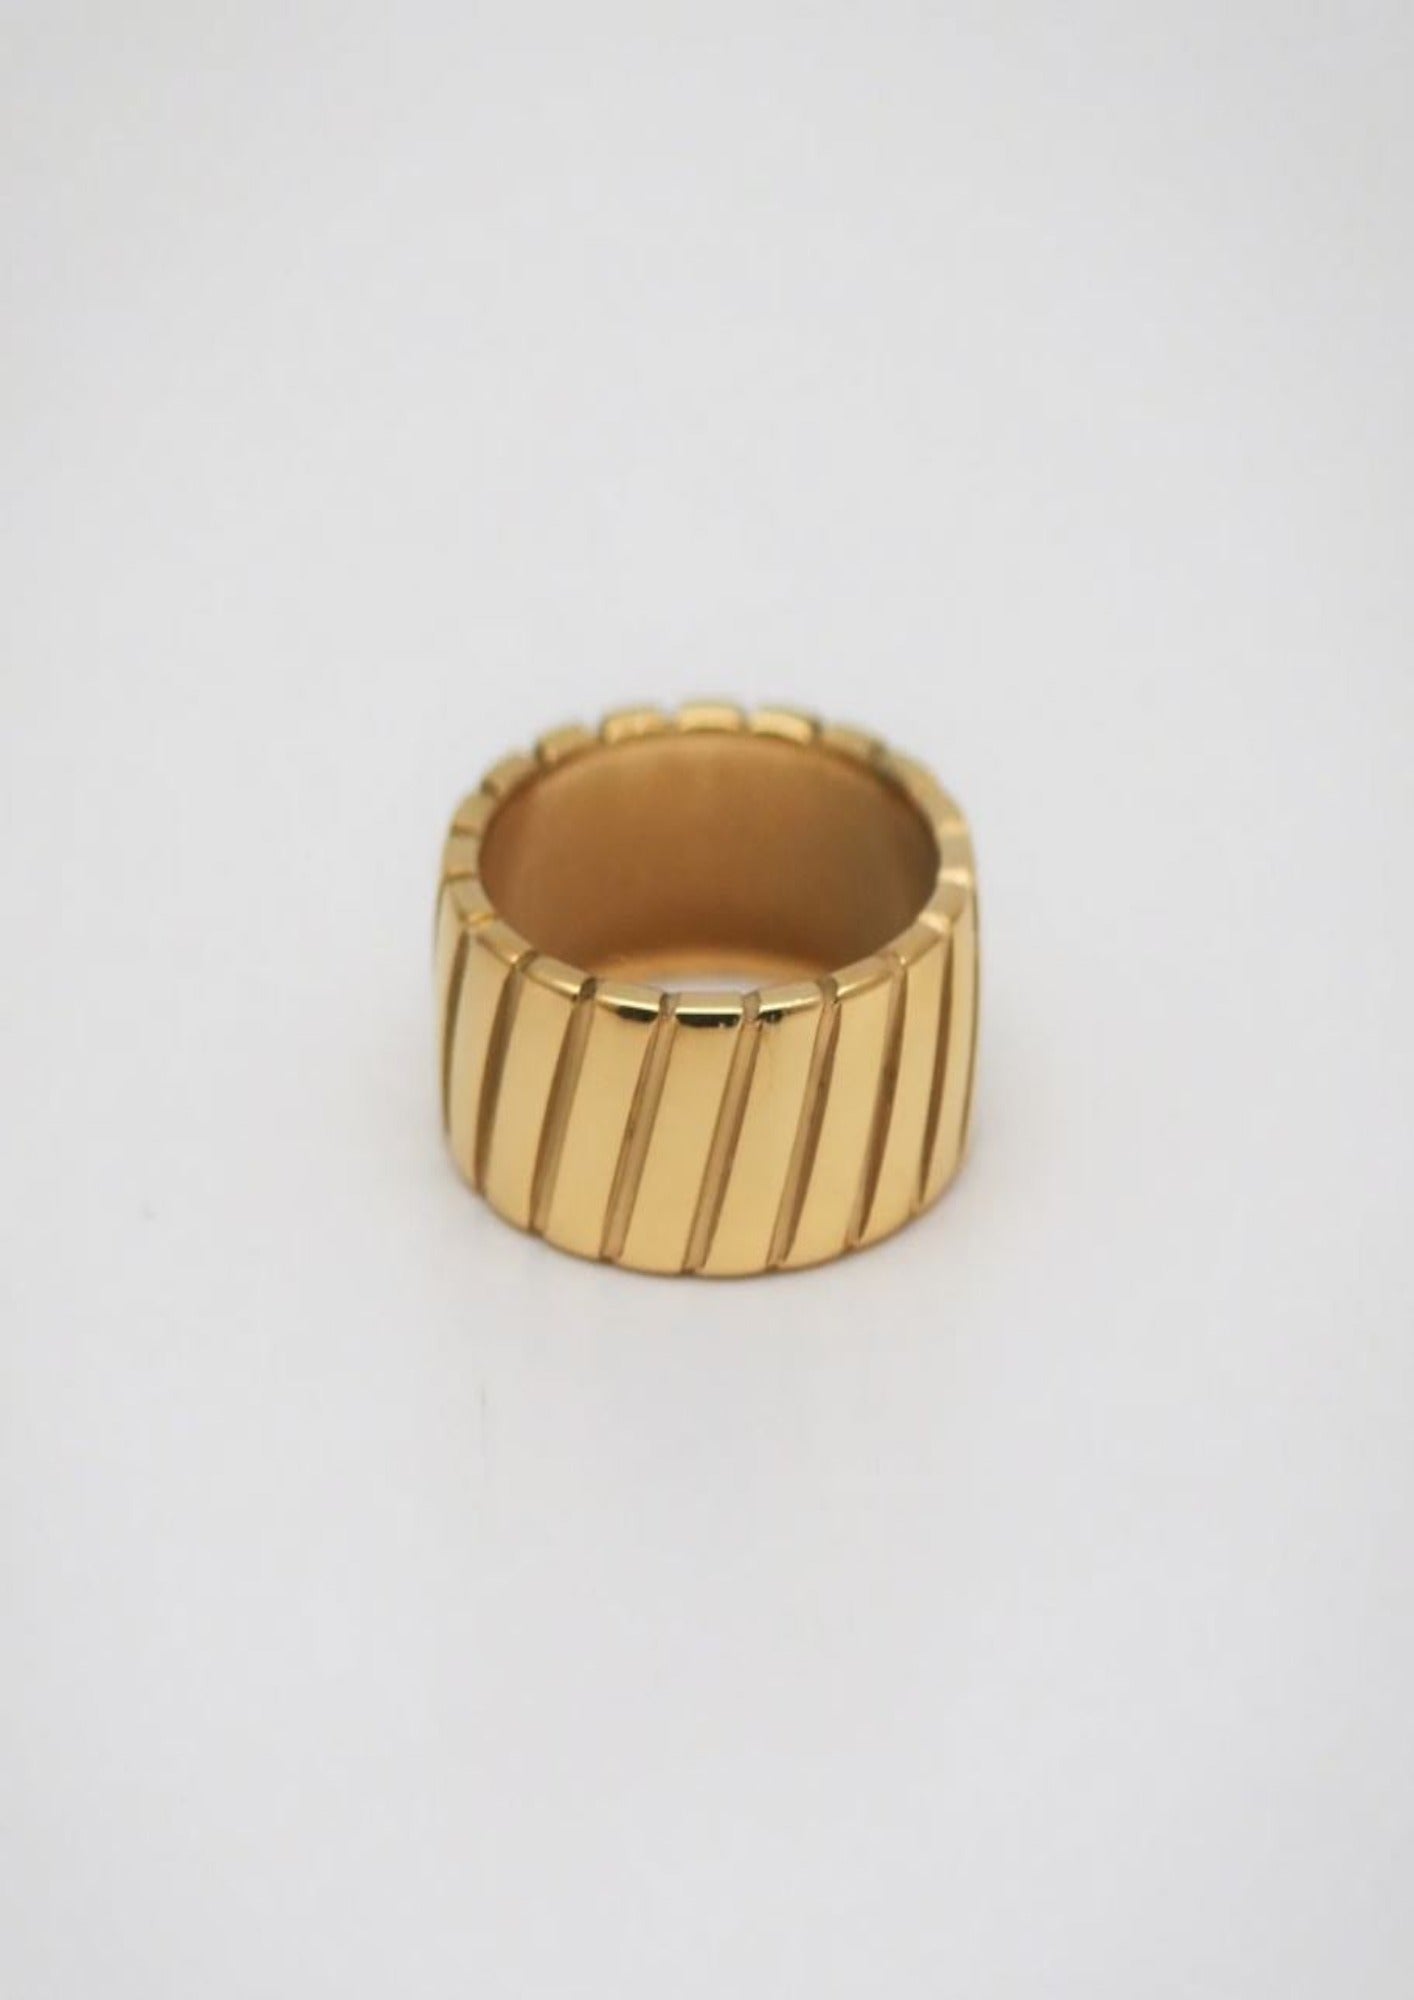 GOLD BEVELED RING earing Yubama Jewelry Online Store - The Elegant Designs of Gold and Silver ! 